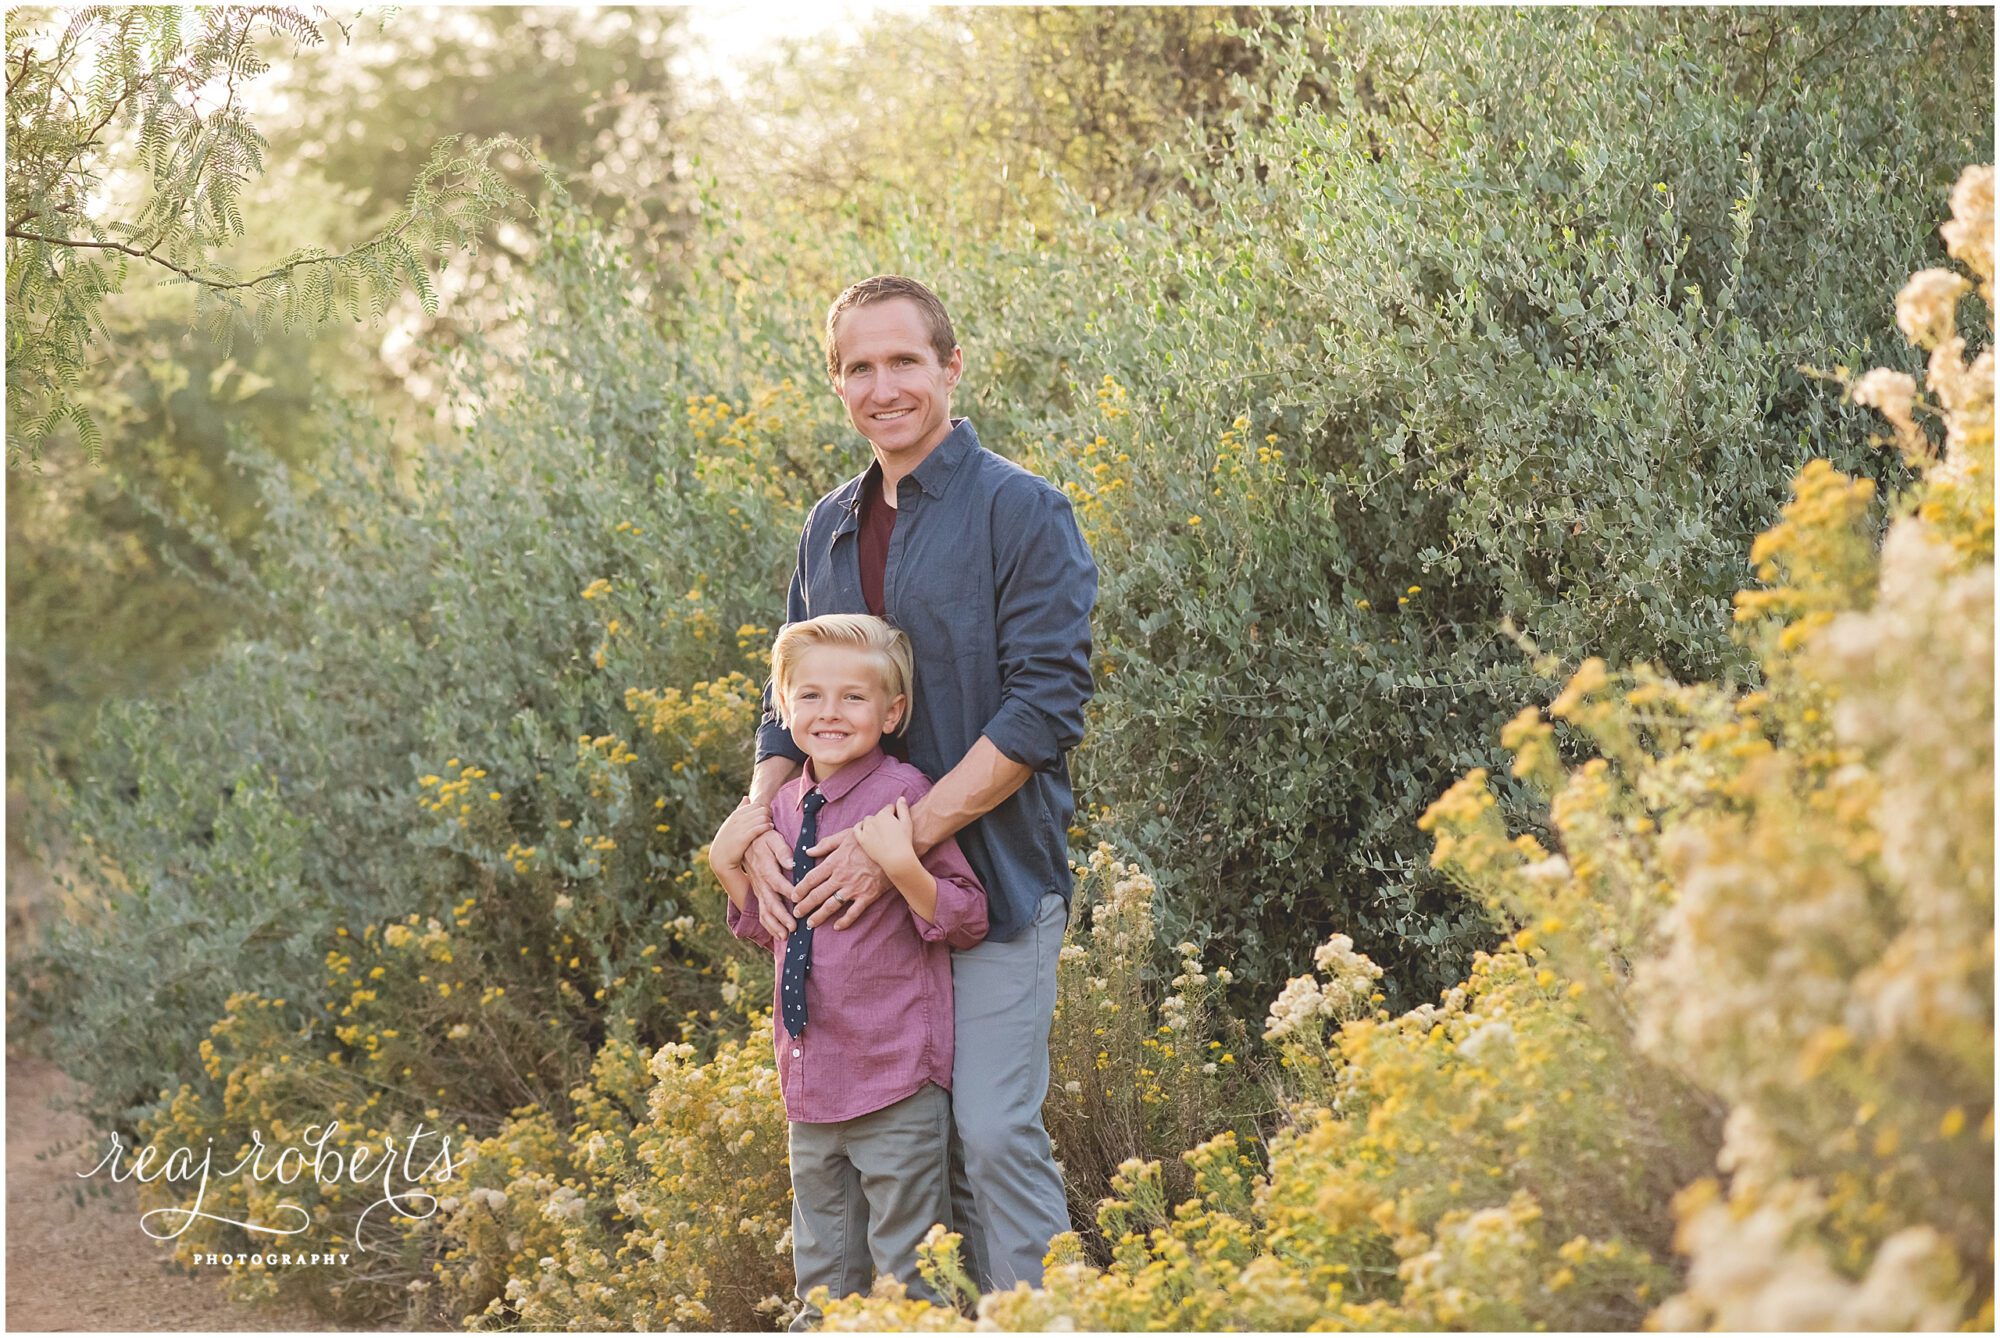 Son and Father pose | Chandler Family Photographer | Reaj Roberts Photography